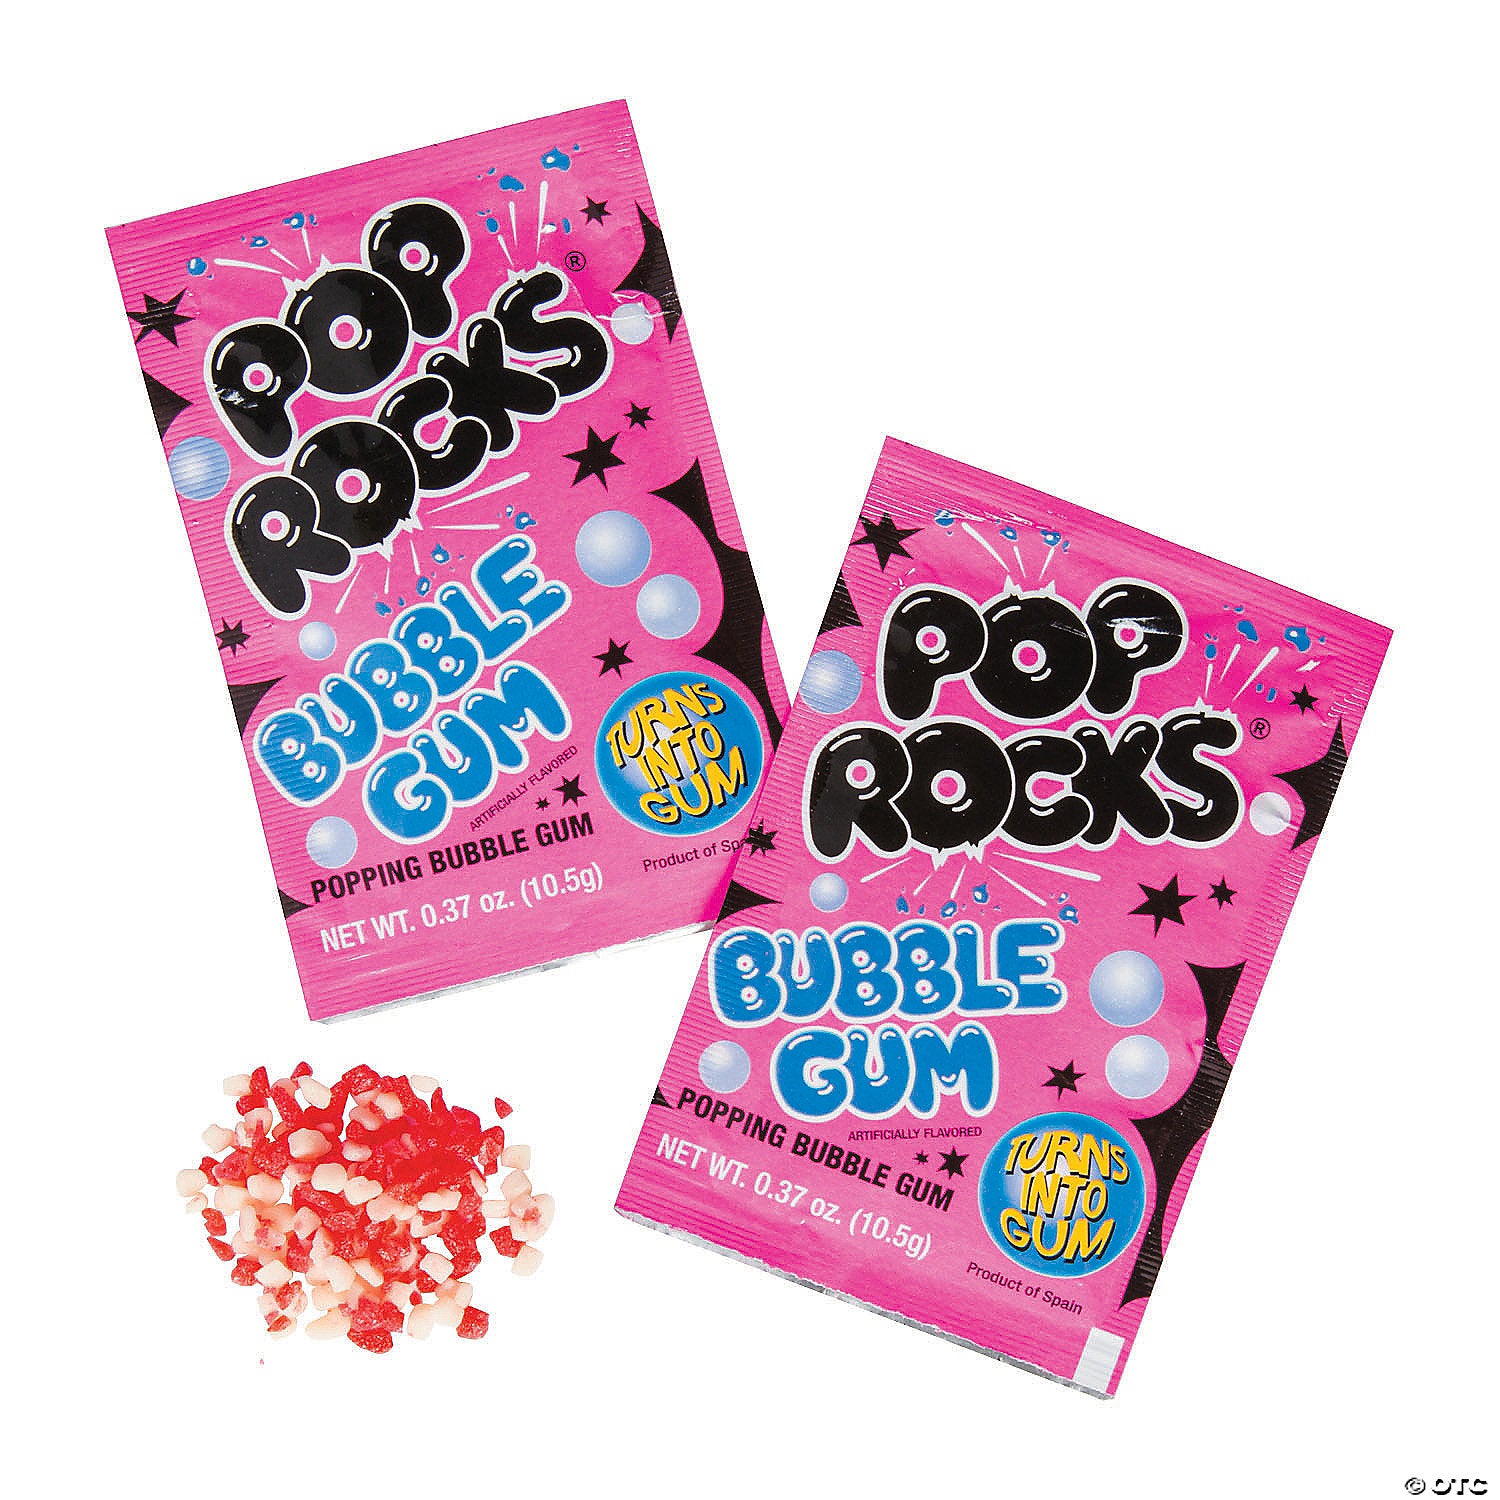 Pop Rocks Bubble Popping Gum .33-oz. Package All City Candy